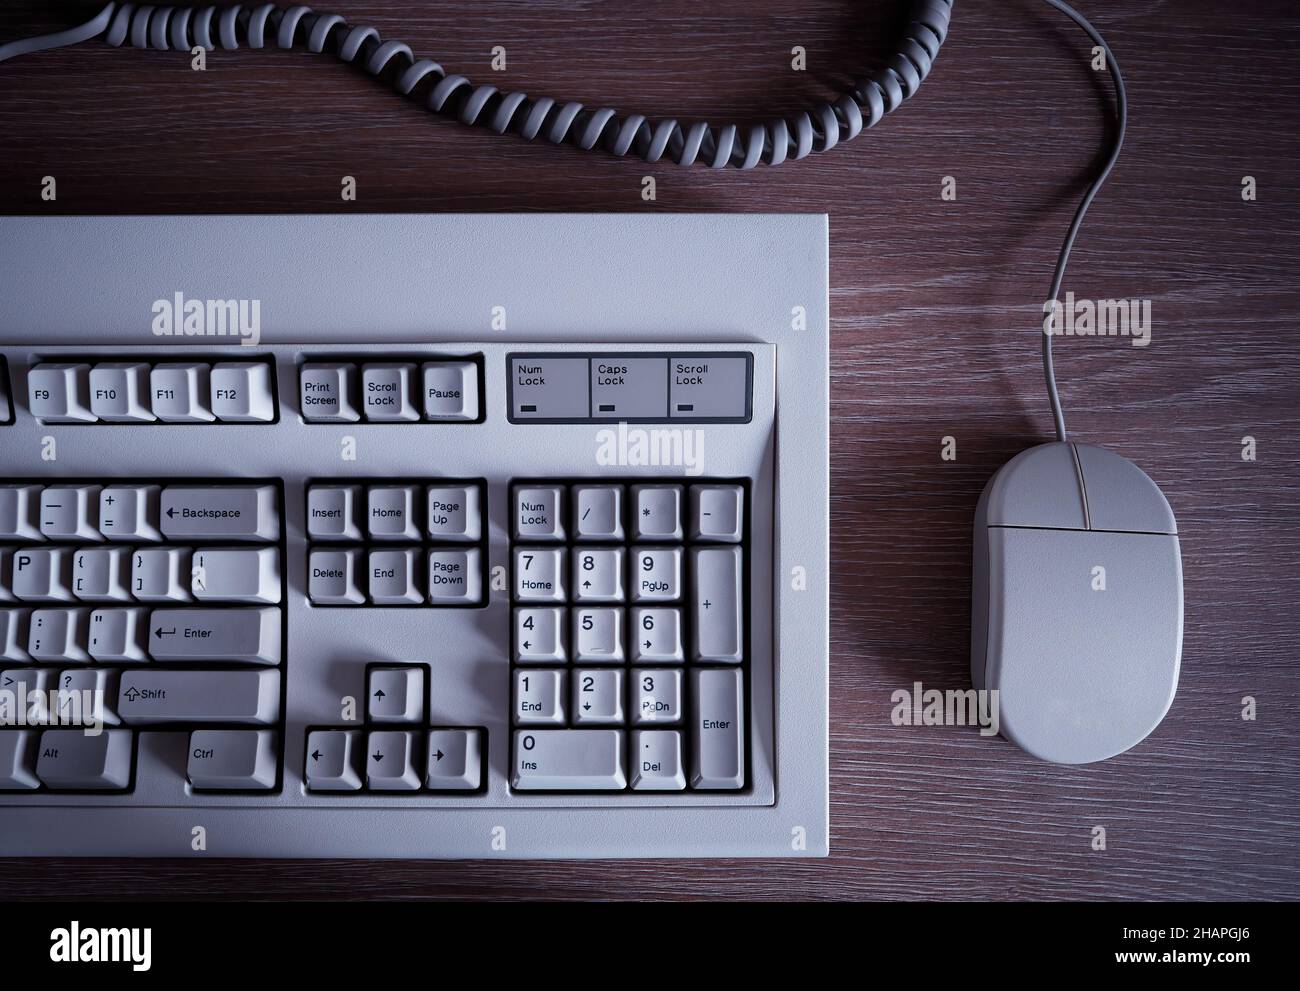 Vintage computer keyboard and mouse background Stock Photo